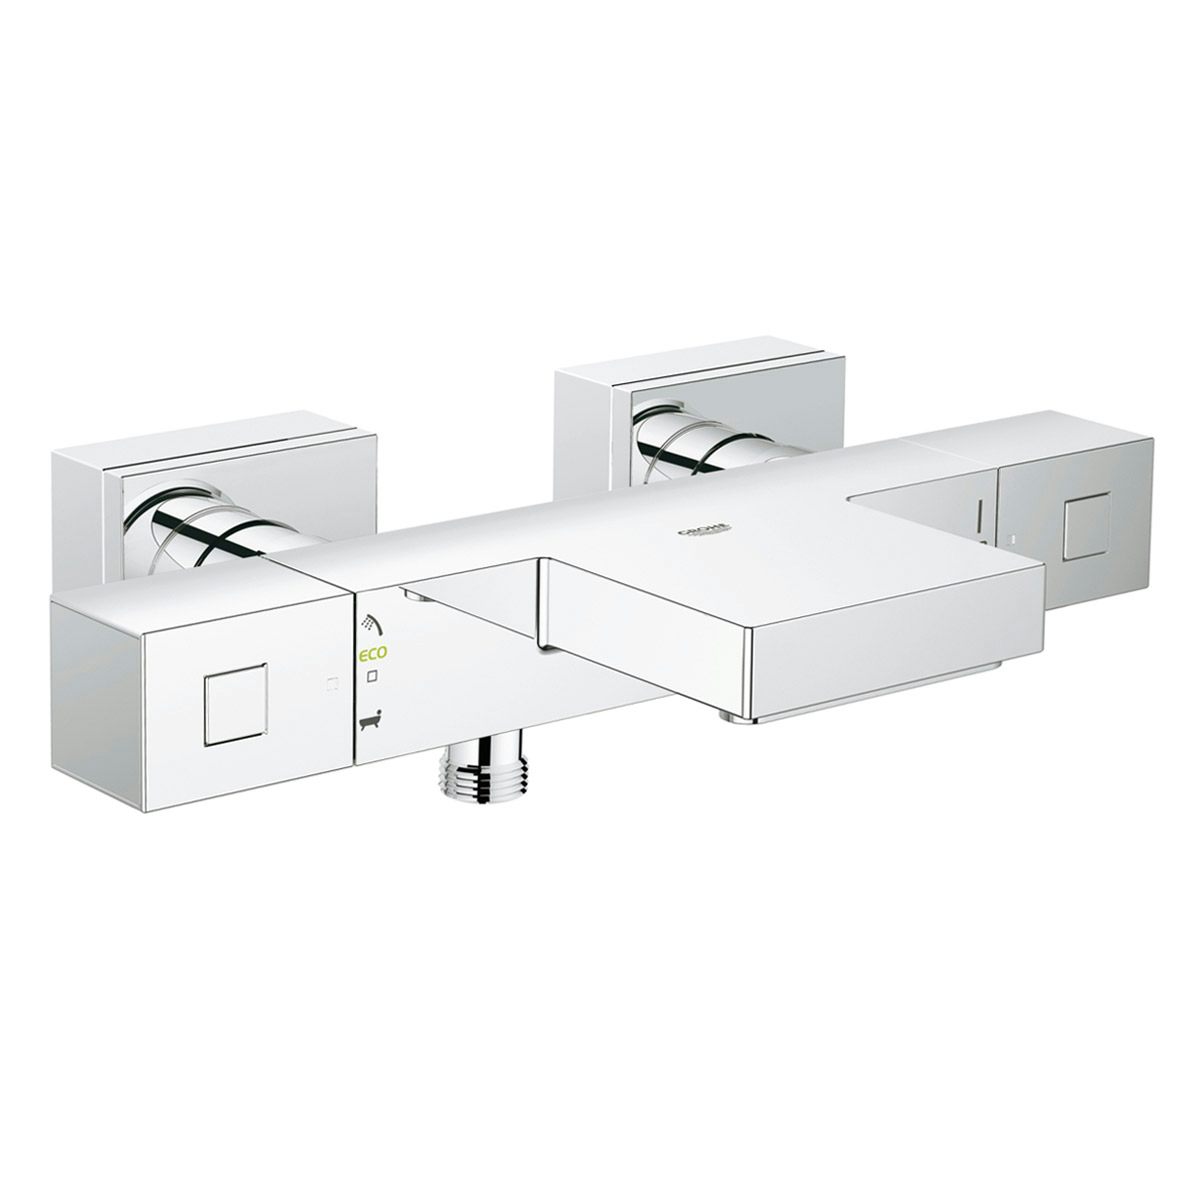 Grohe Grohtherm Cube thermostatic bath shower mixer tap